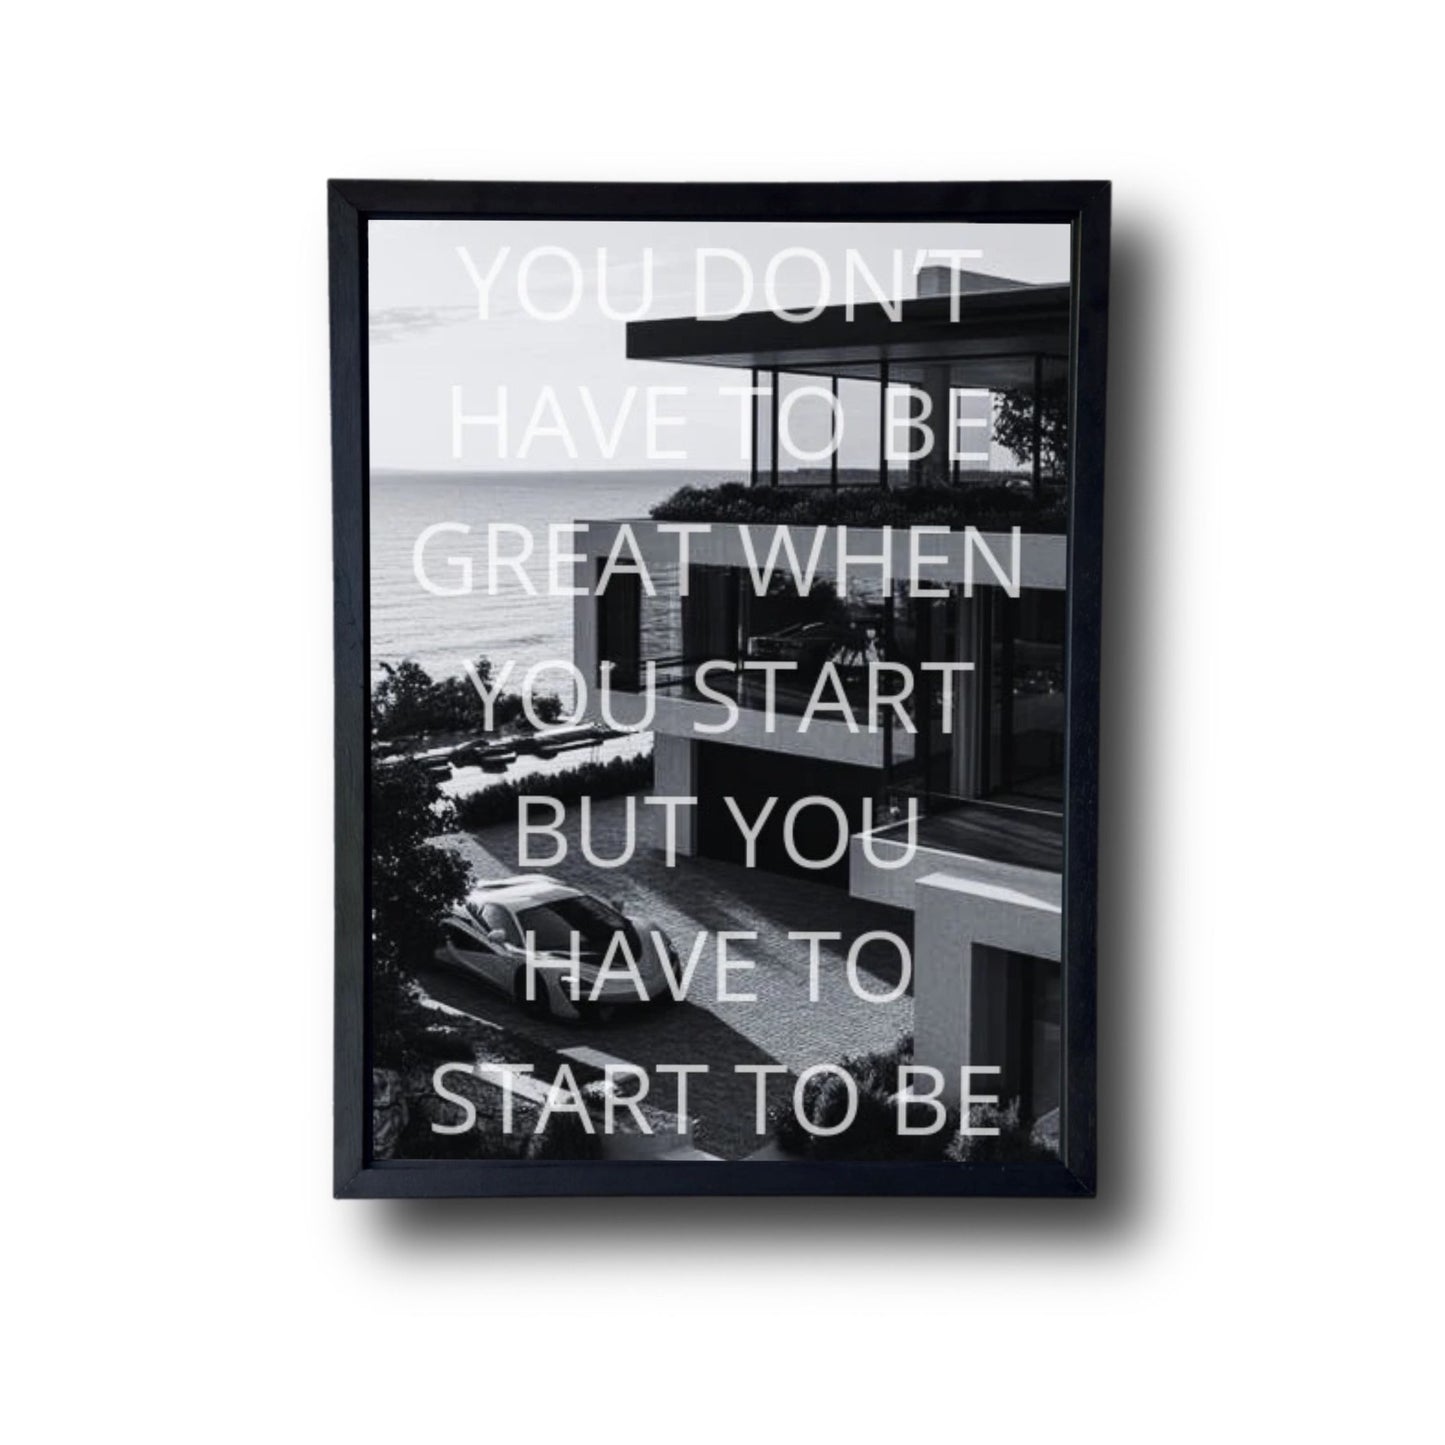 YOU DON'T HAVE TO BE GREAT WHEN YOU START YOU HAVE TO START TO BE GREAT